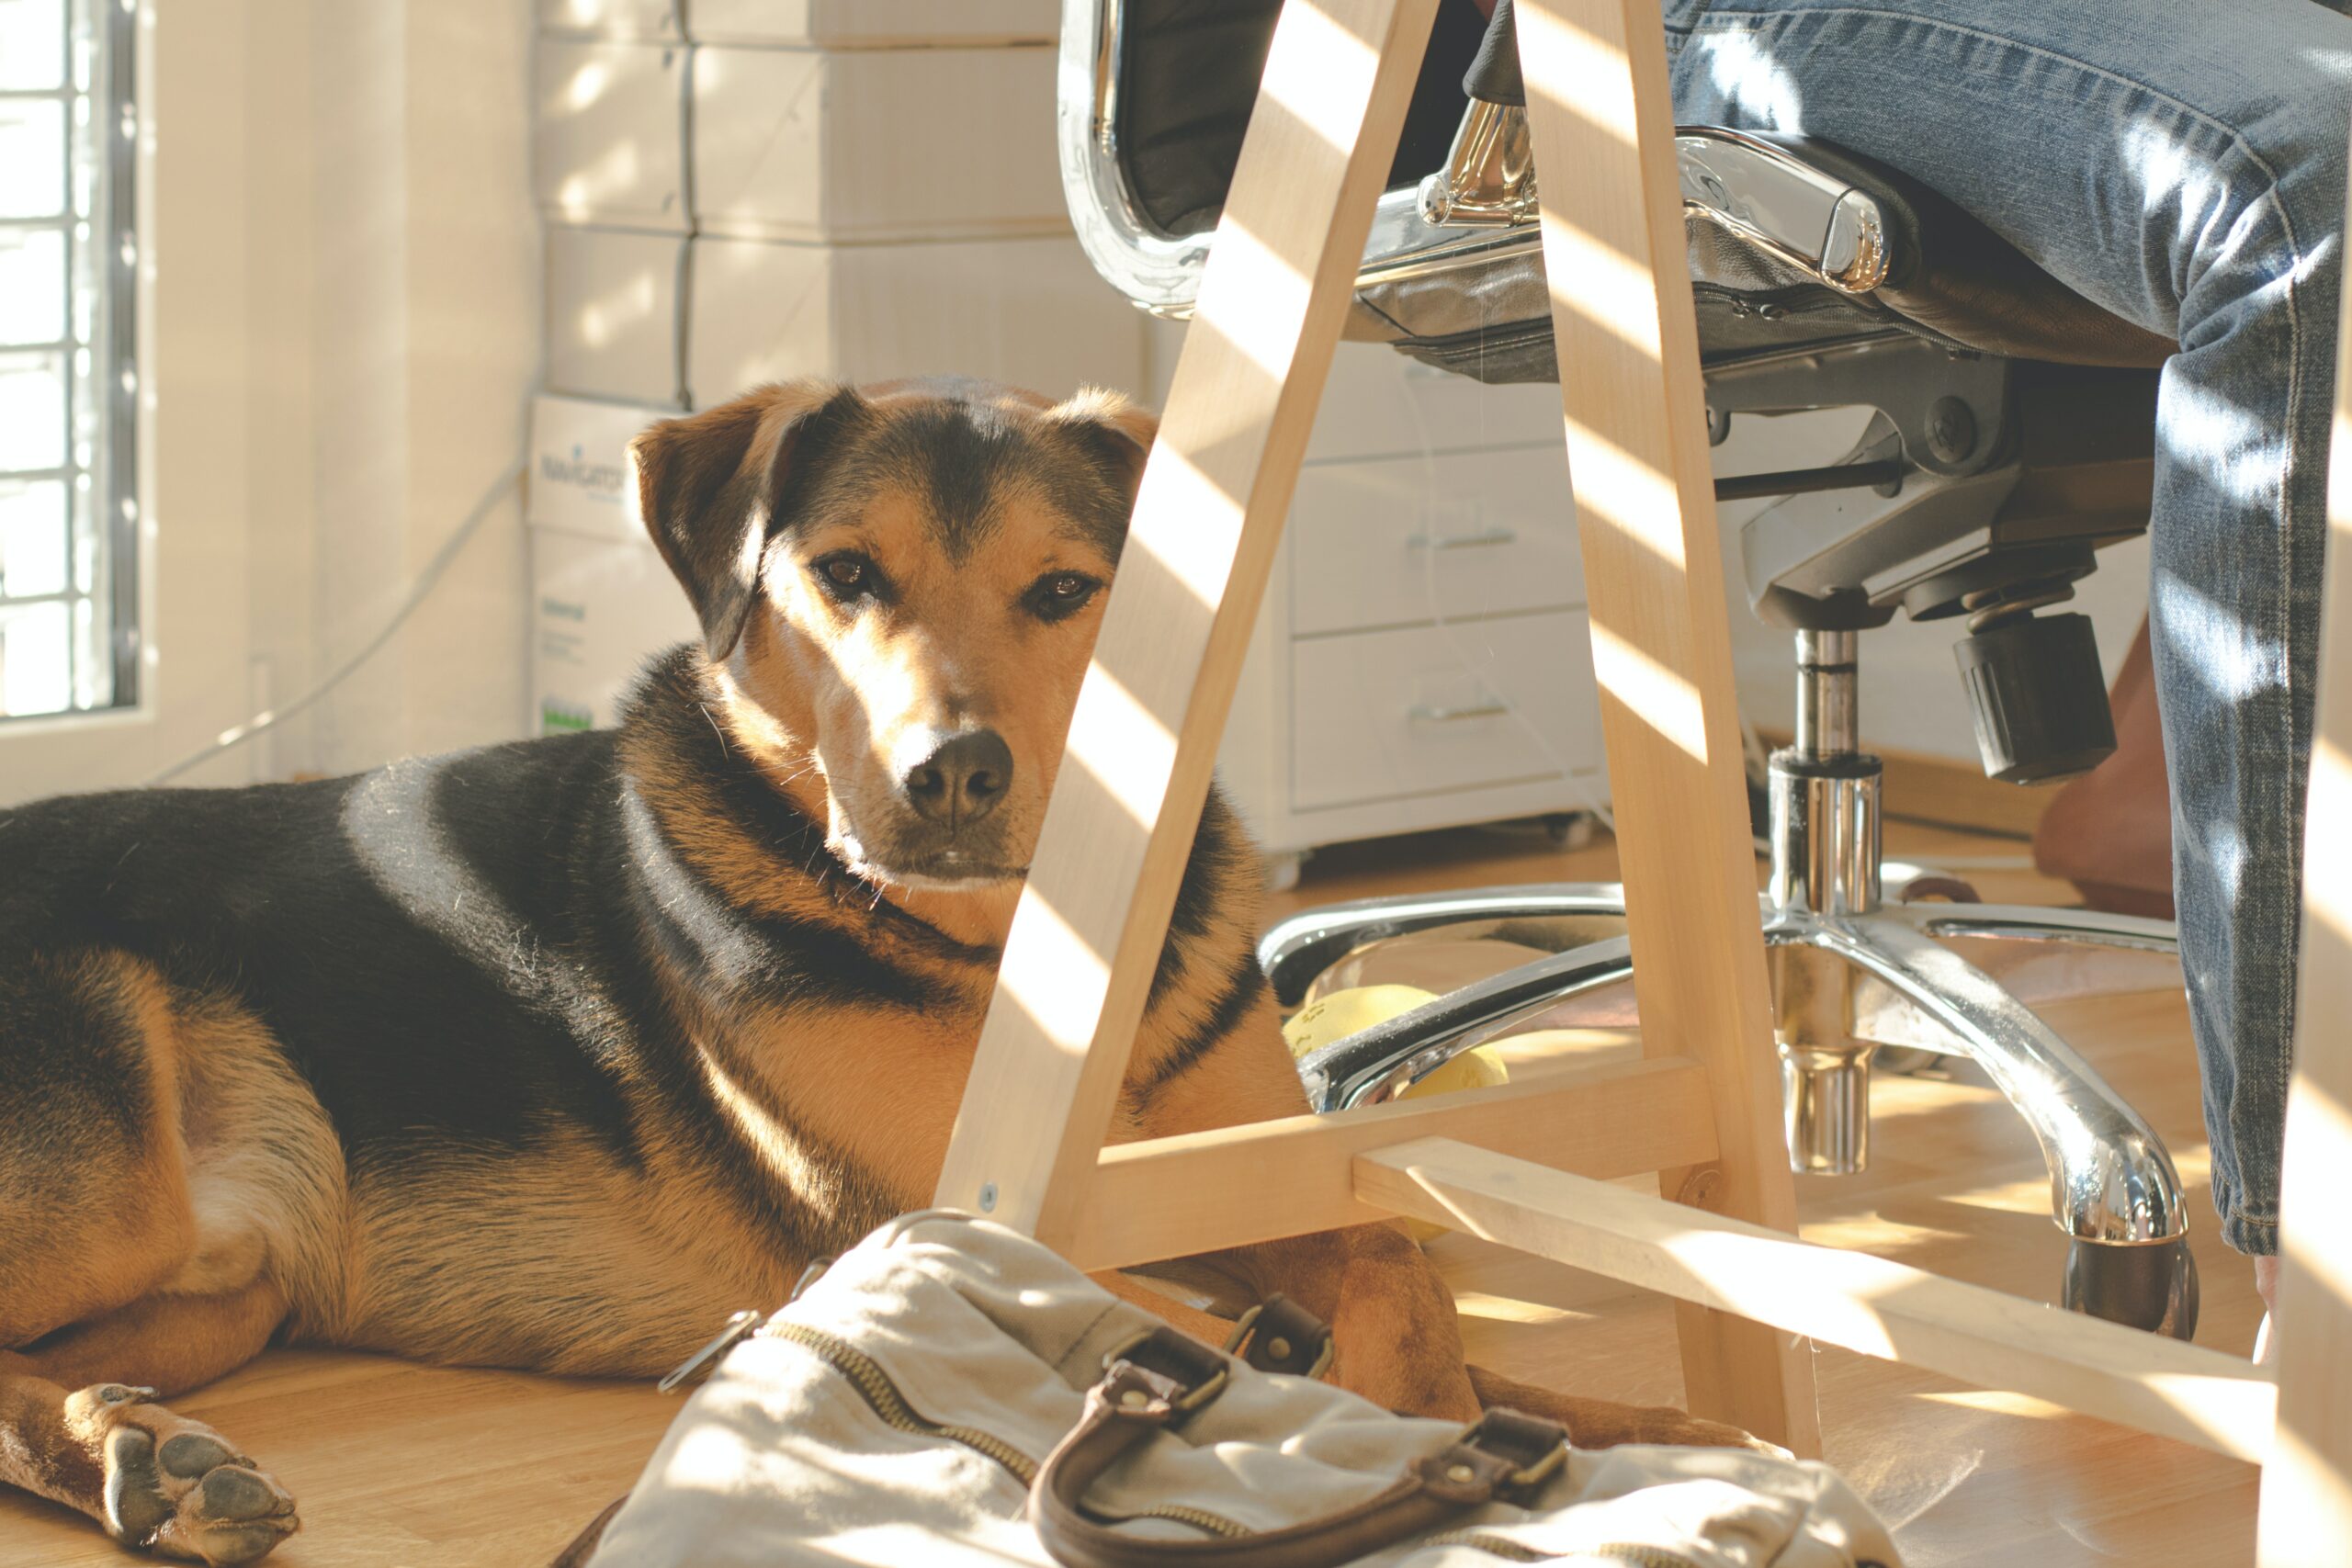 Finding the Best Dog-friendly Workplaces